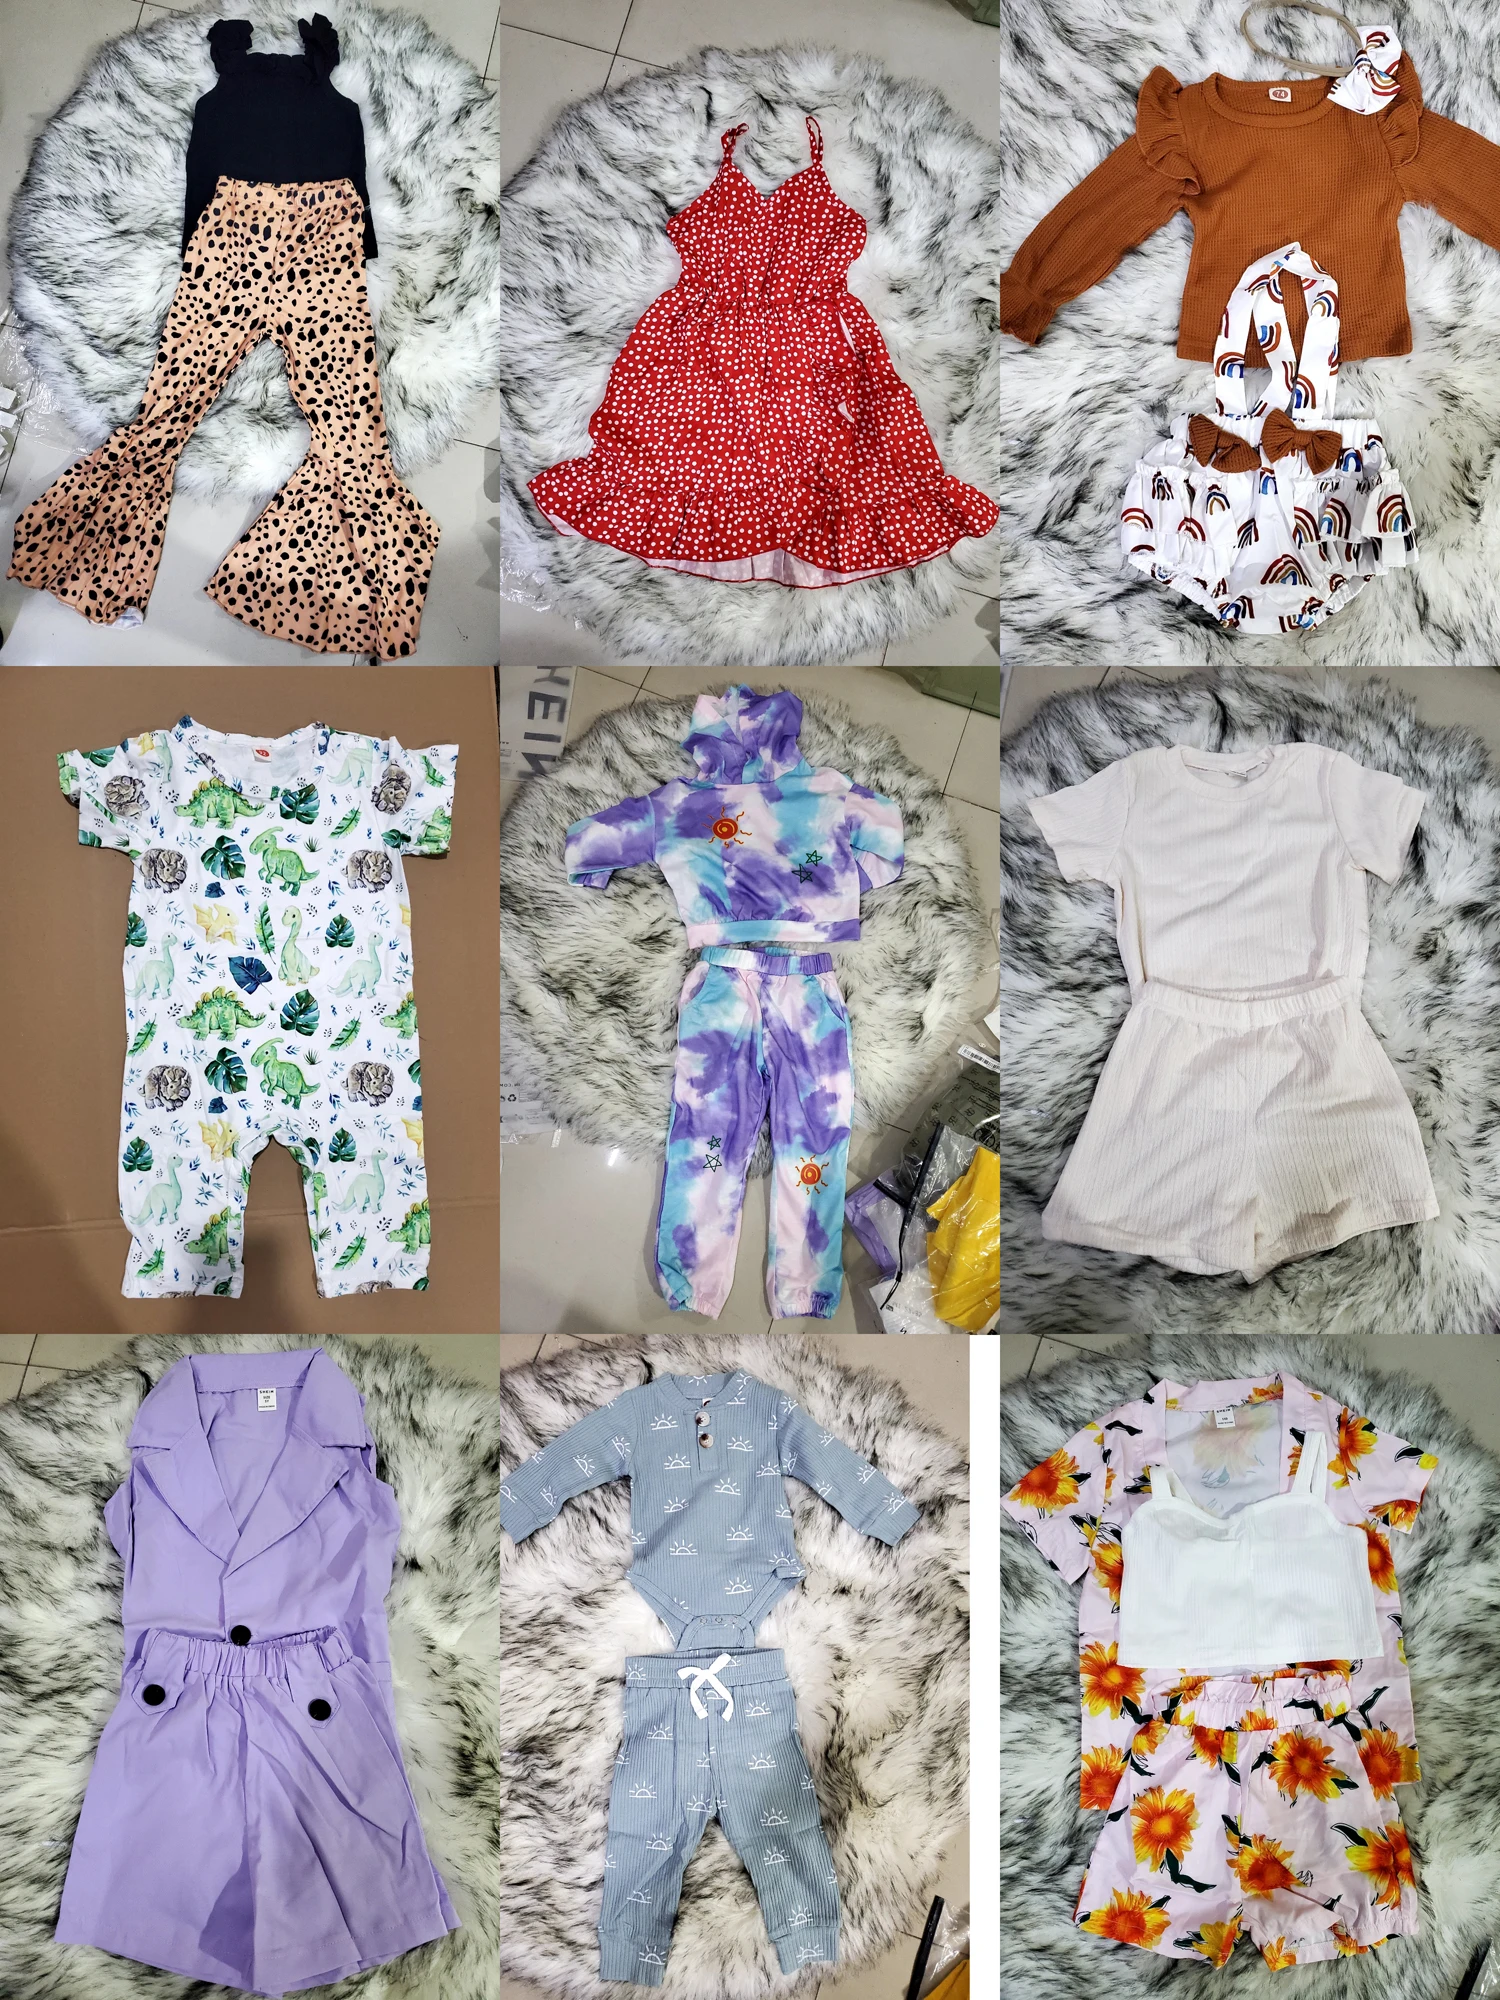 sheined kids Patpated whole sale kidswear premium  bale baby clothes supplier kids bale brand new  terno